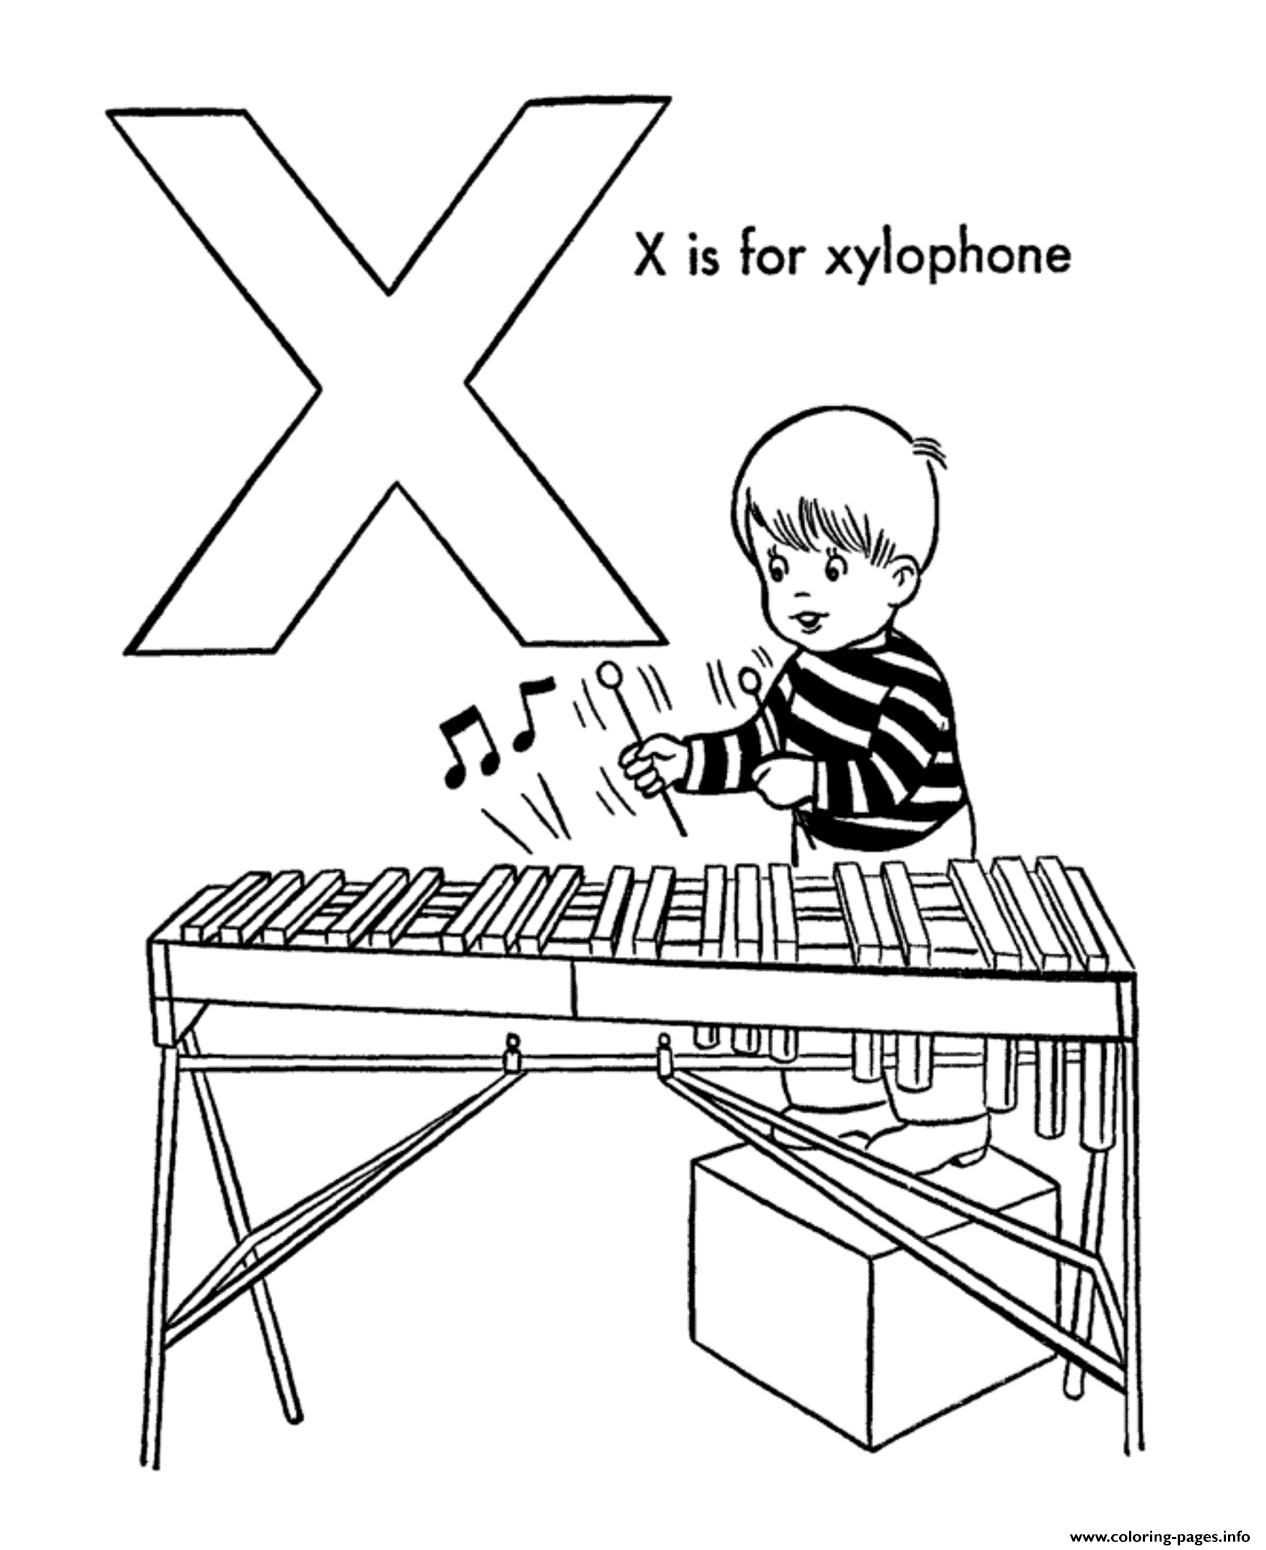 Download Kid Playing Xylophone Alphabet S7f44 Coloring Pages Printable